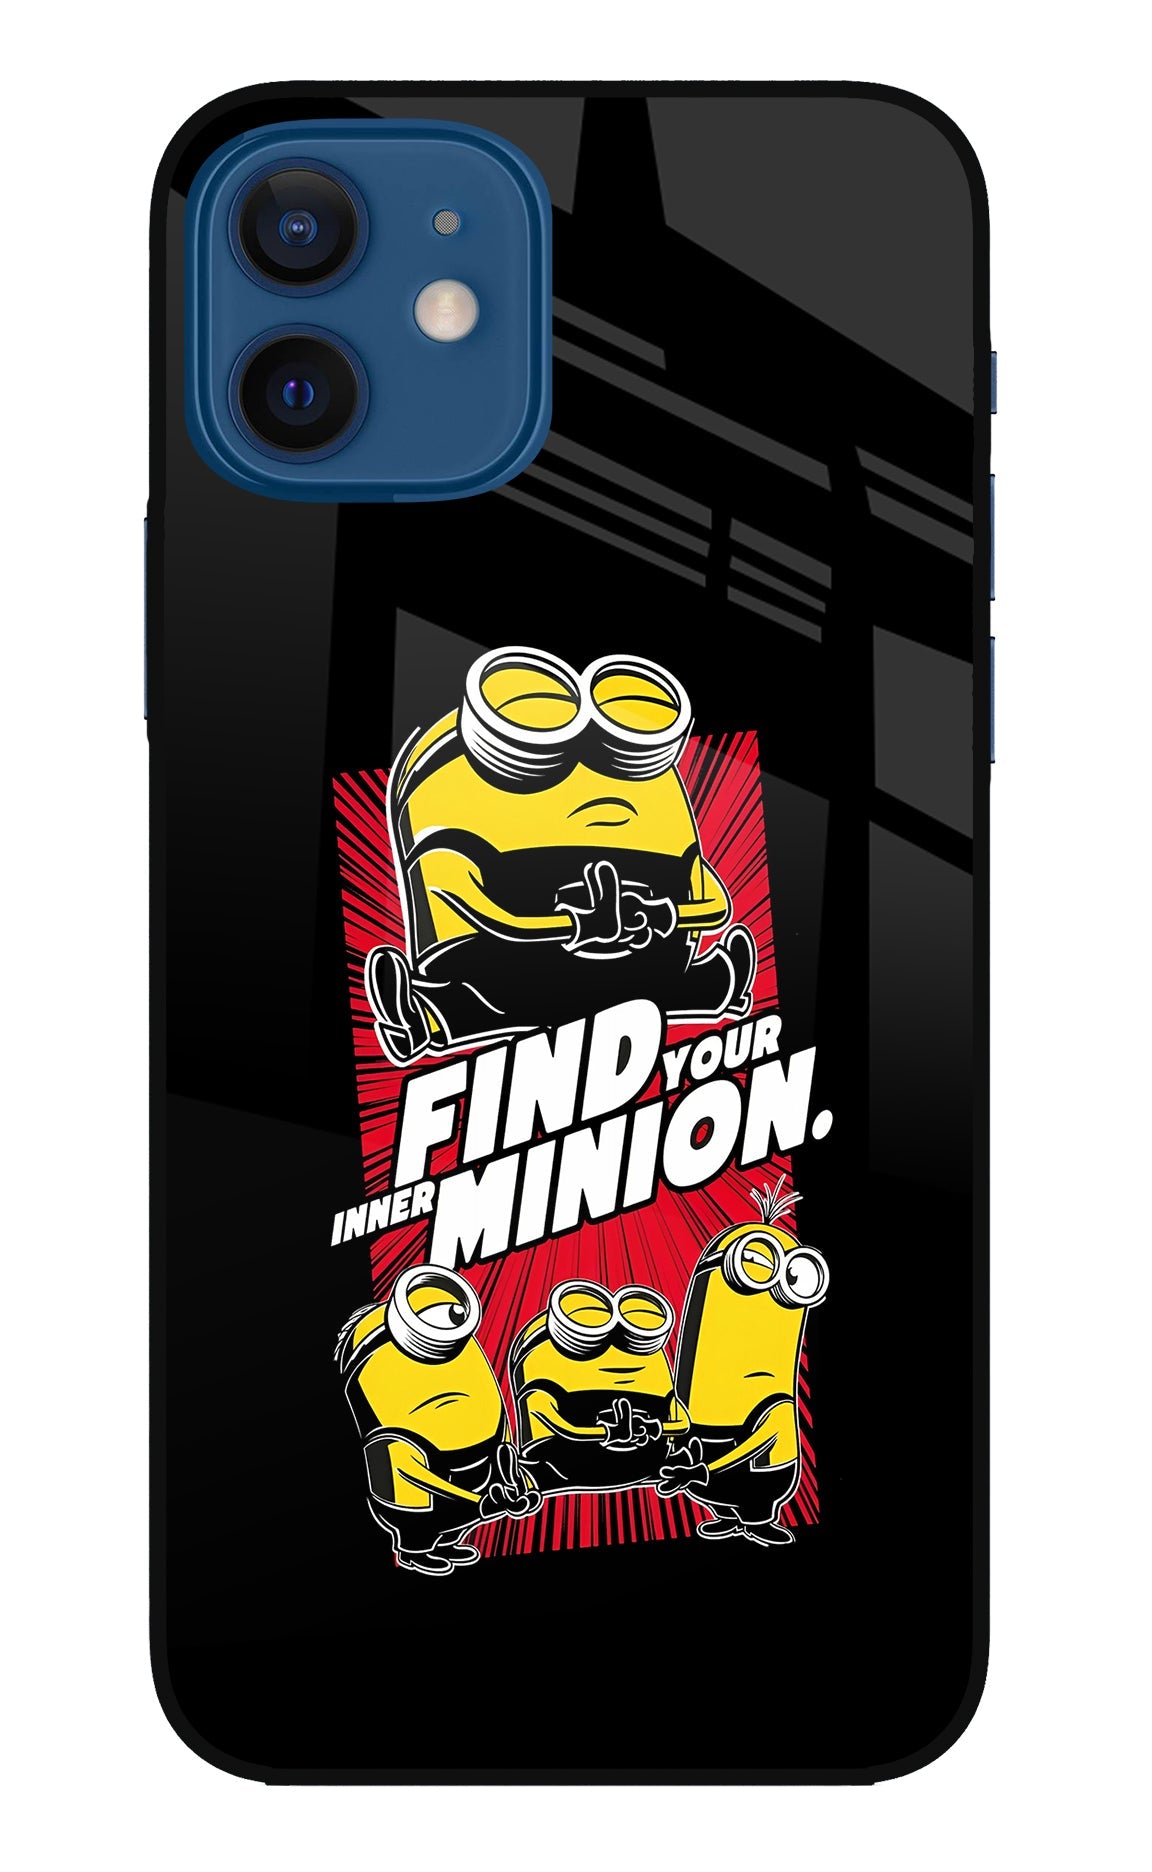 Find your inner Minion iPhone 12 Glass Case